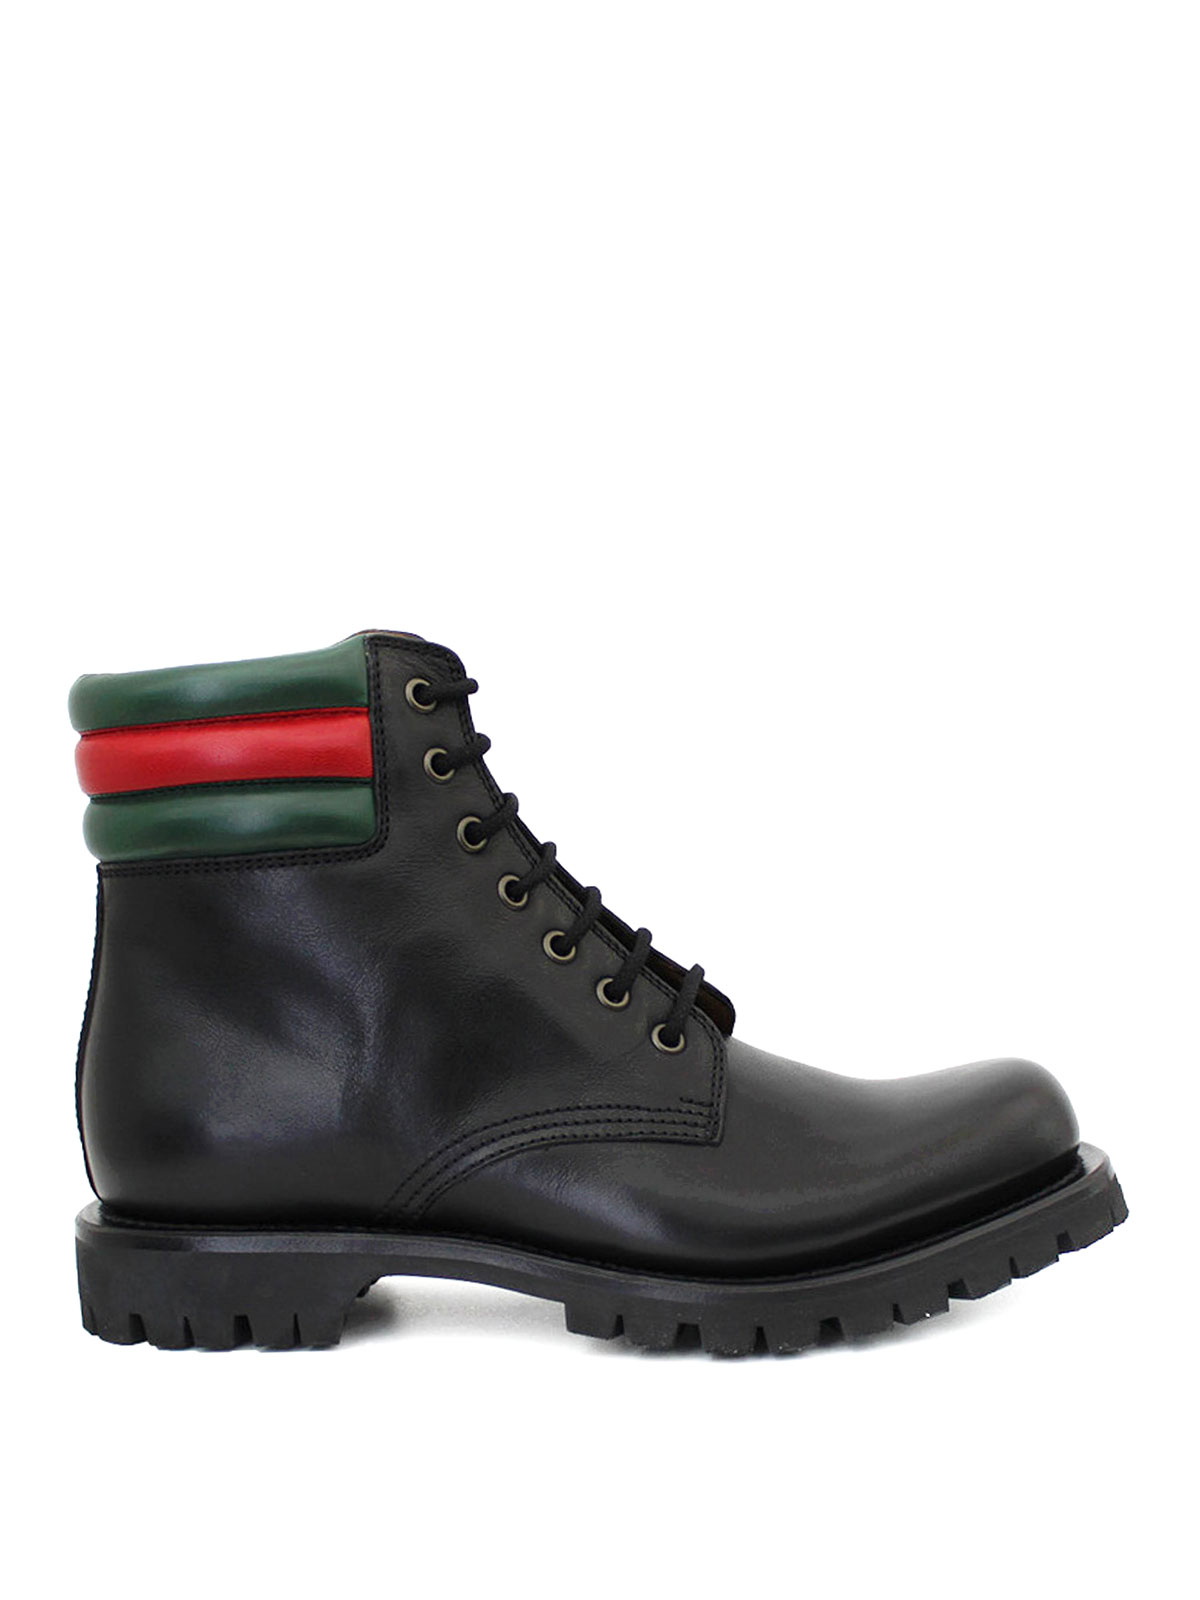 Gucci - Web detailed combat boots - ankle boots - 429220ABMA01064